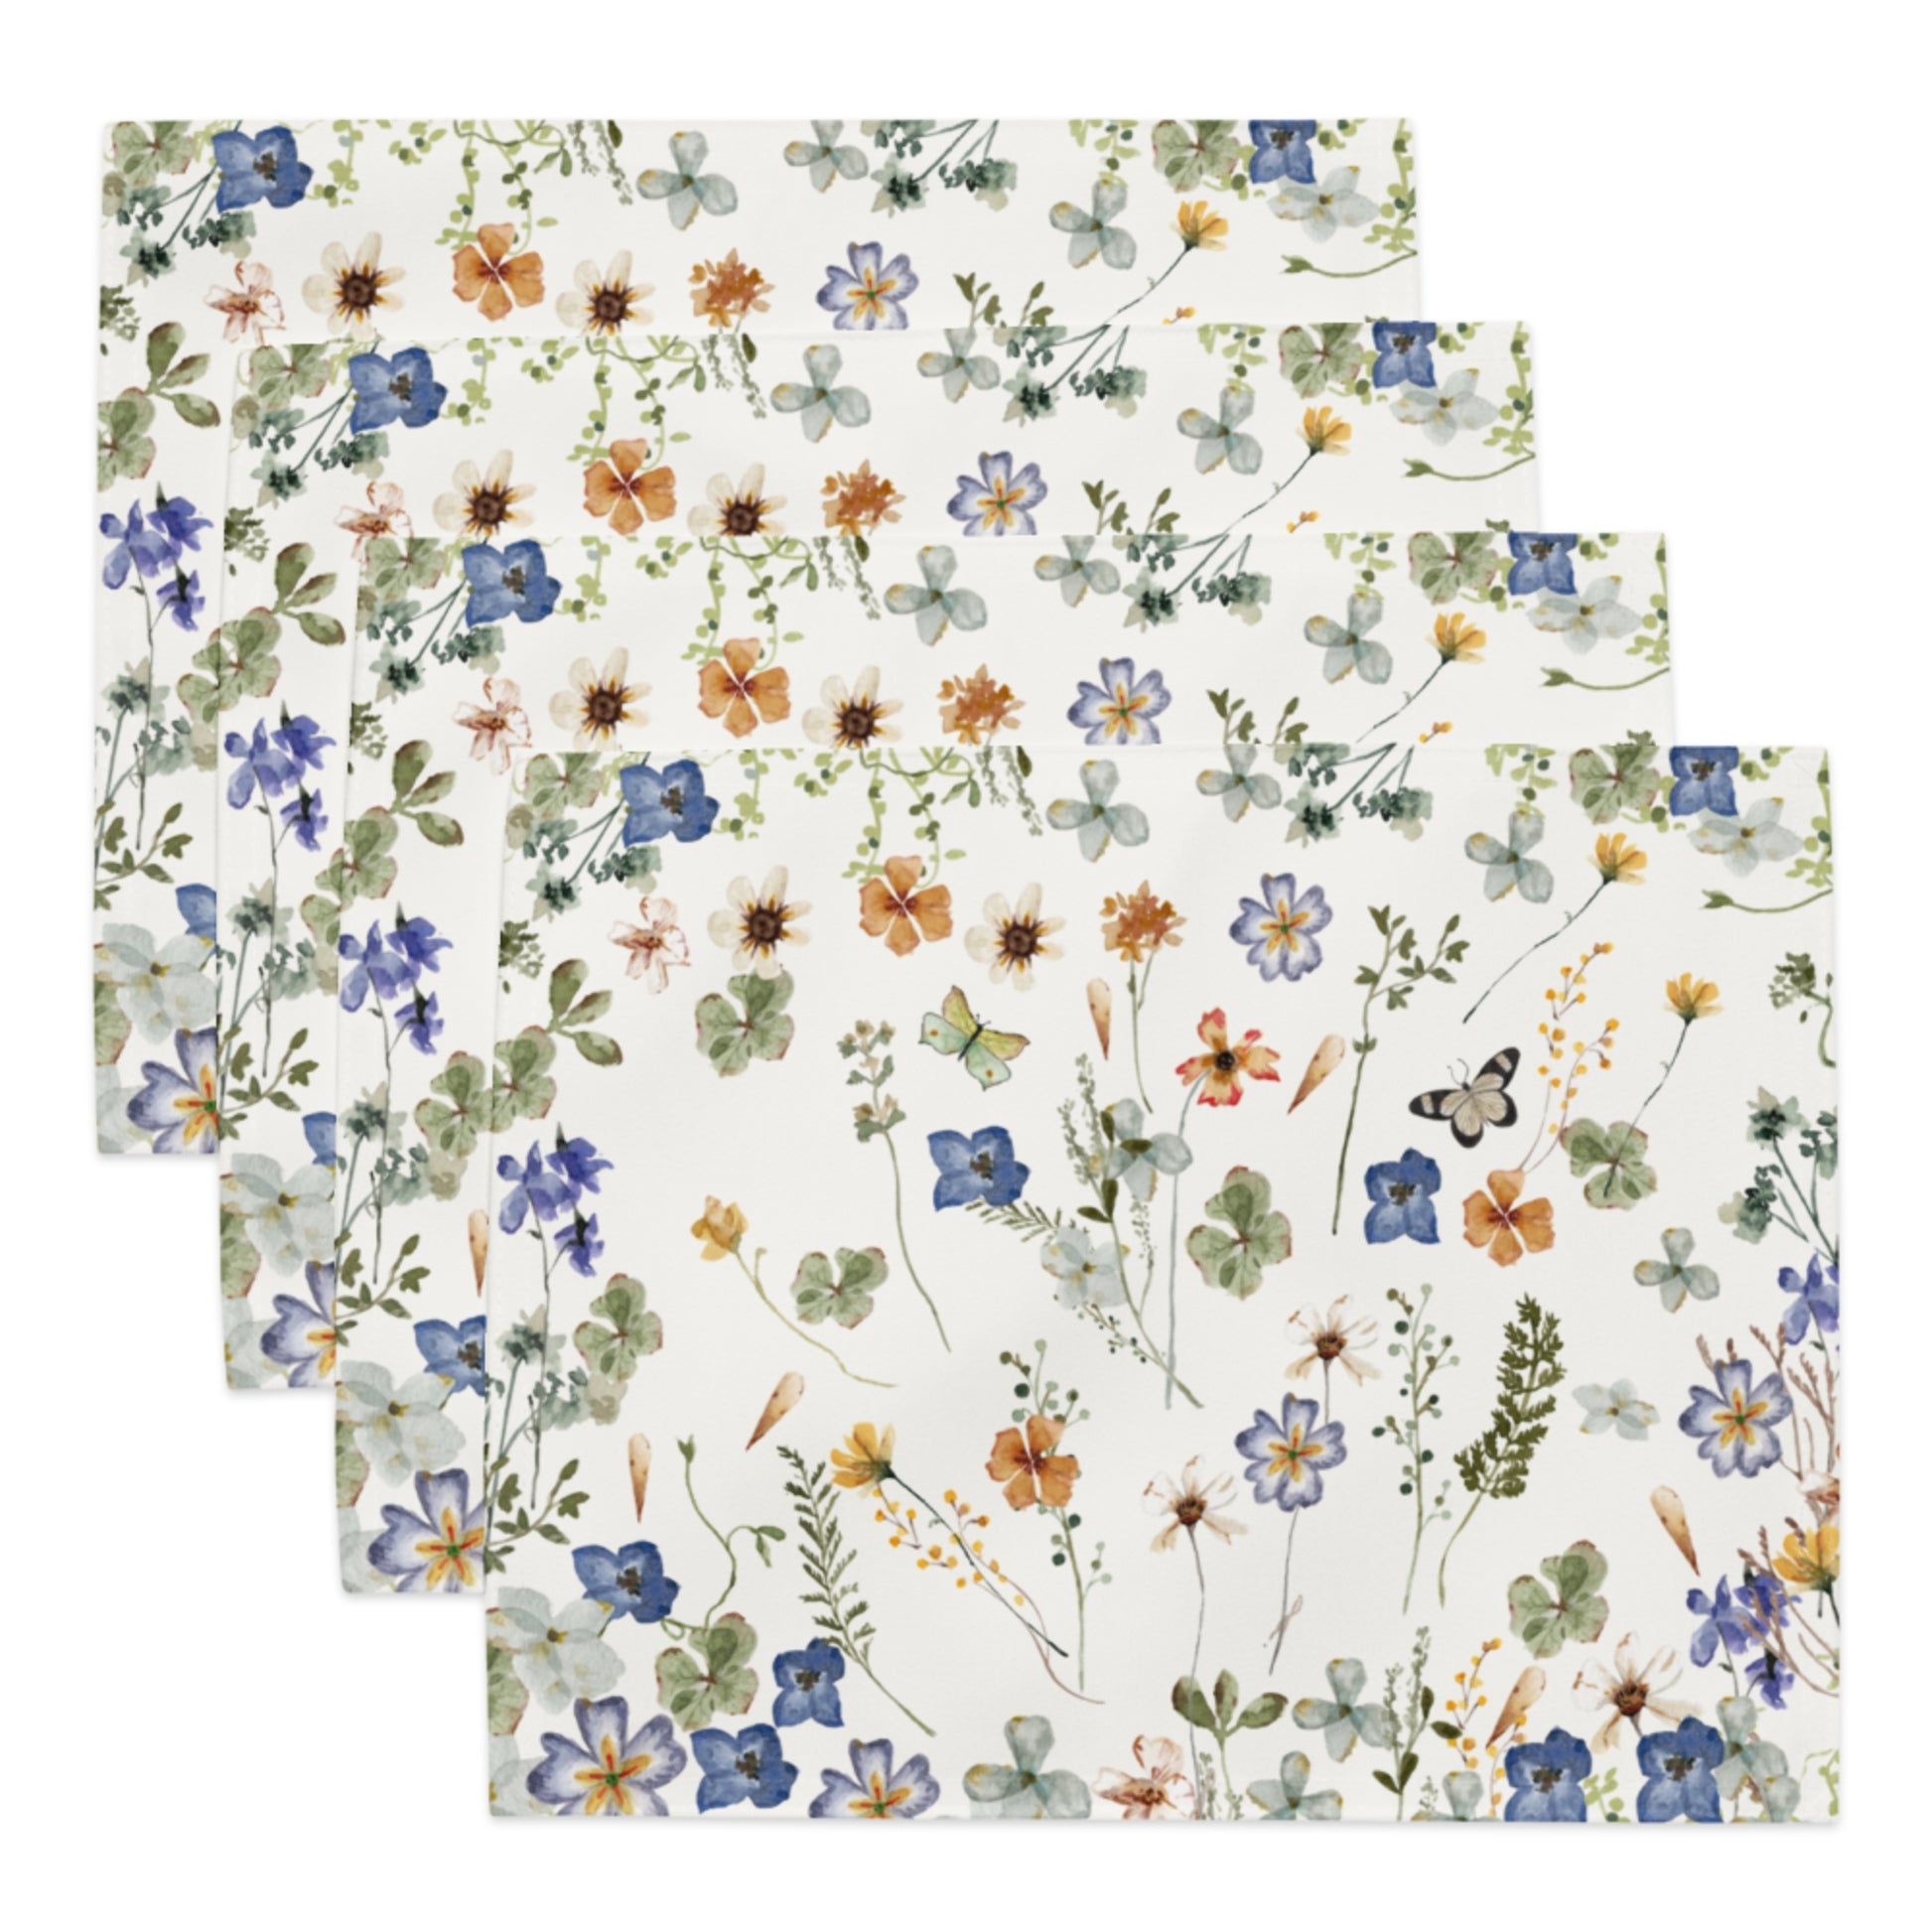 set of 4 Wildflowers Floral PLACEMAT - White Tone from BLUE WATER SONGS